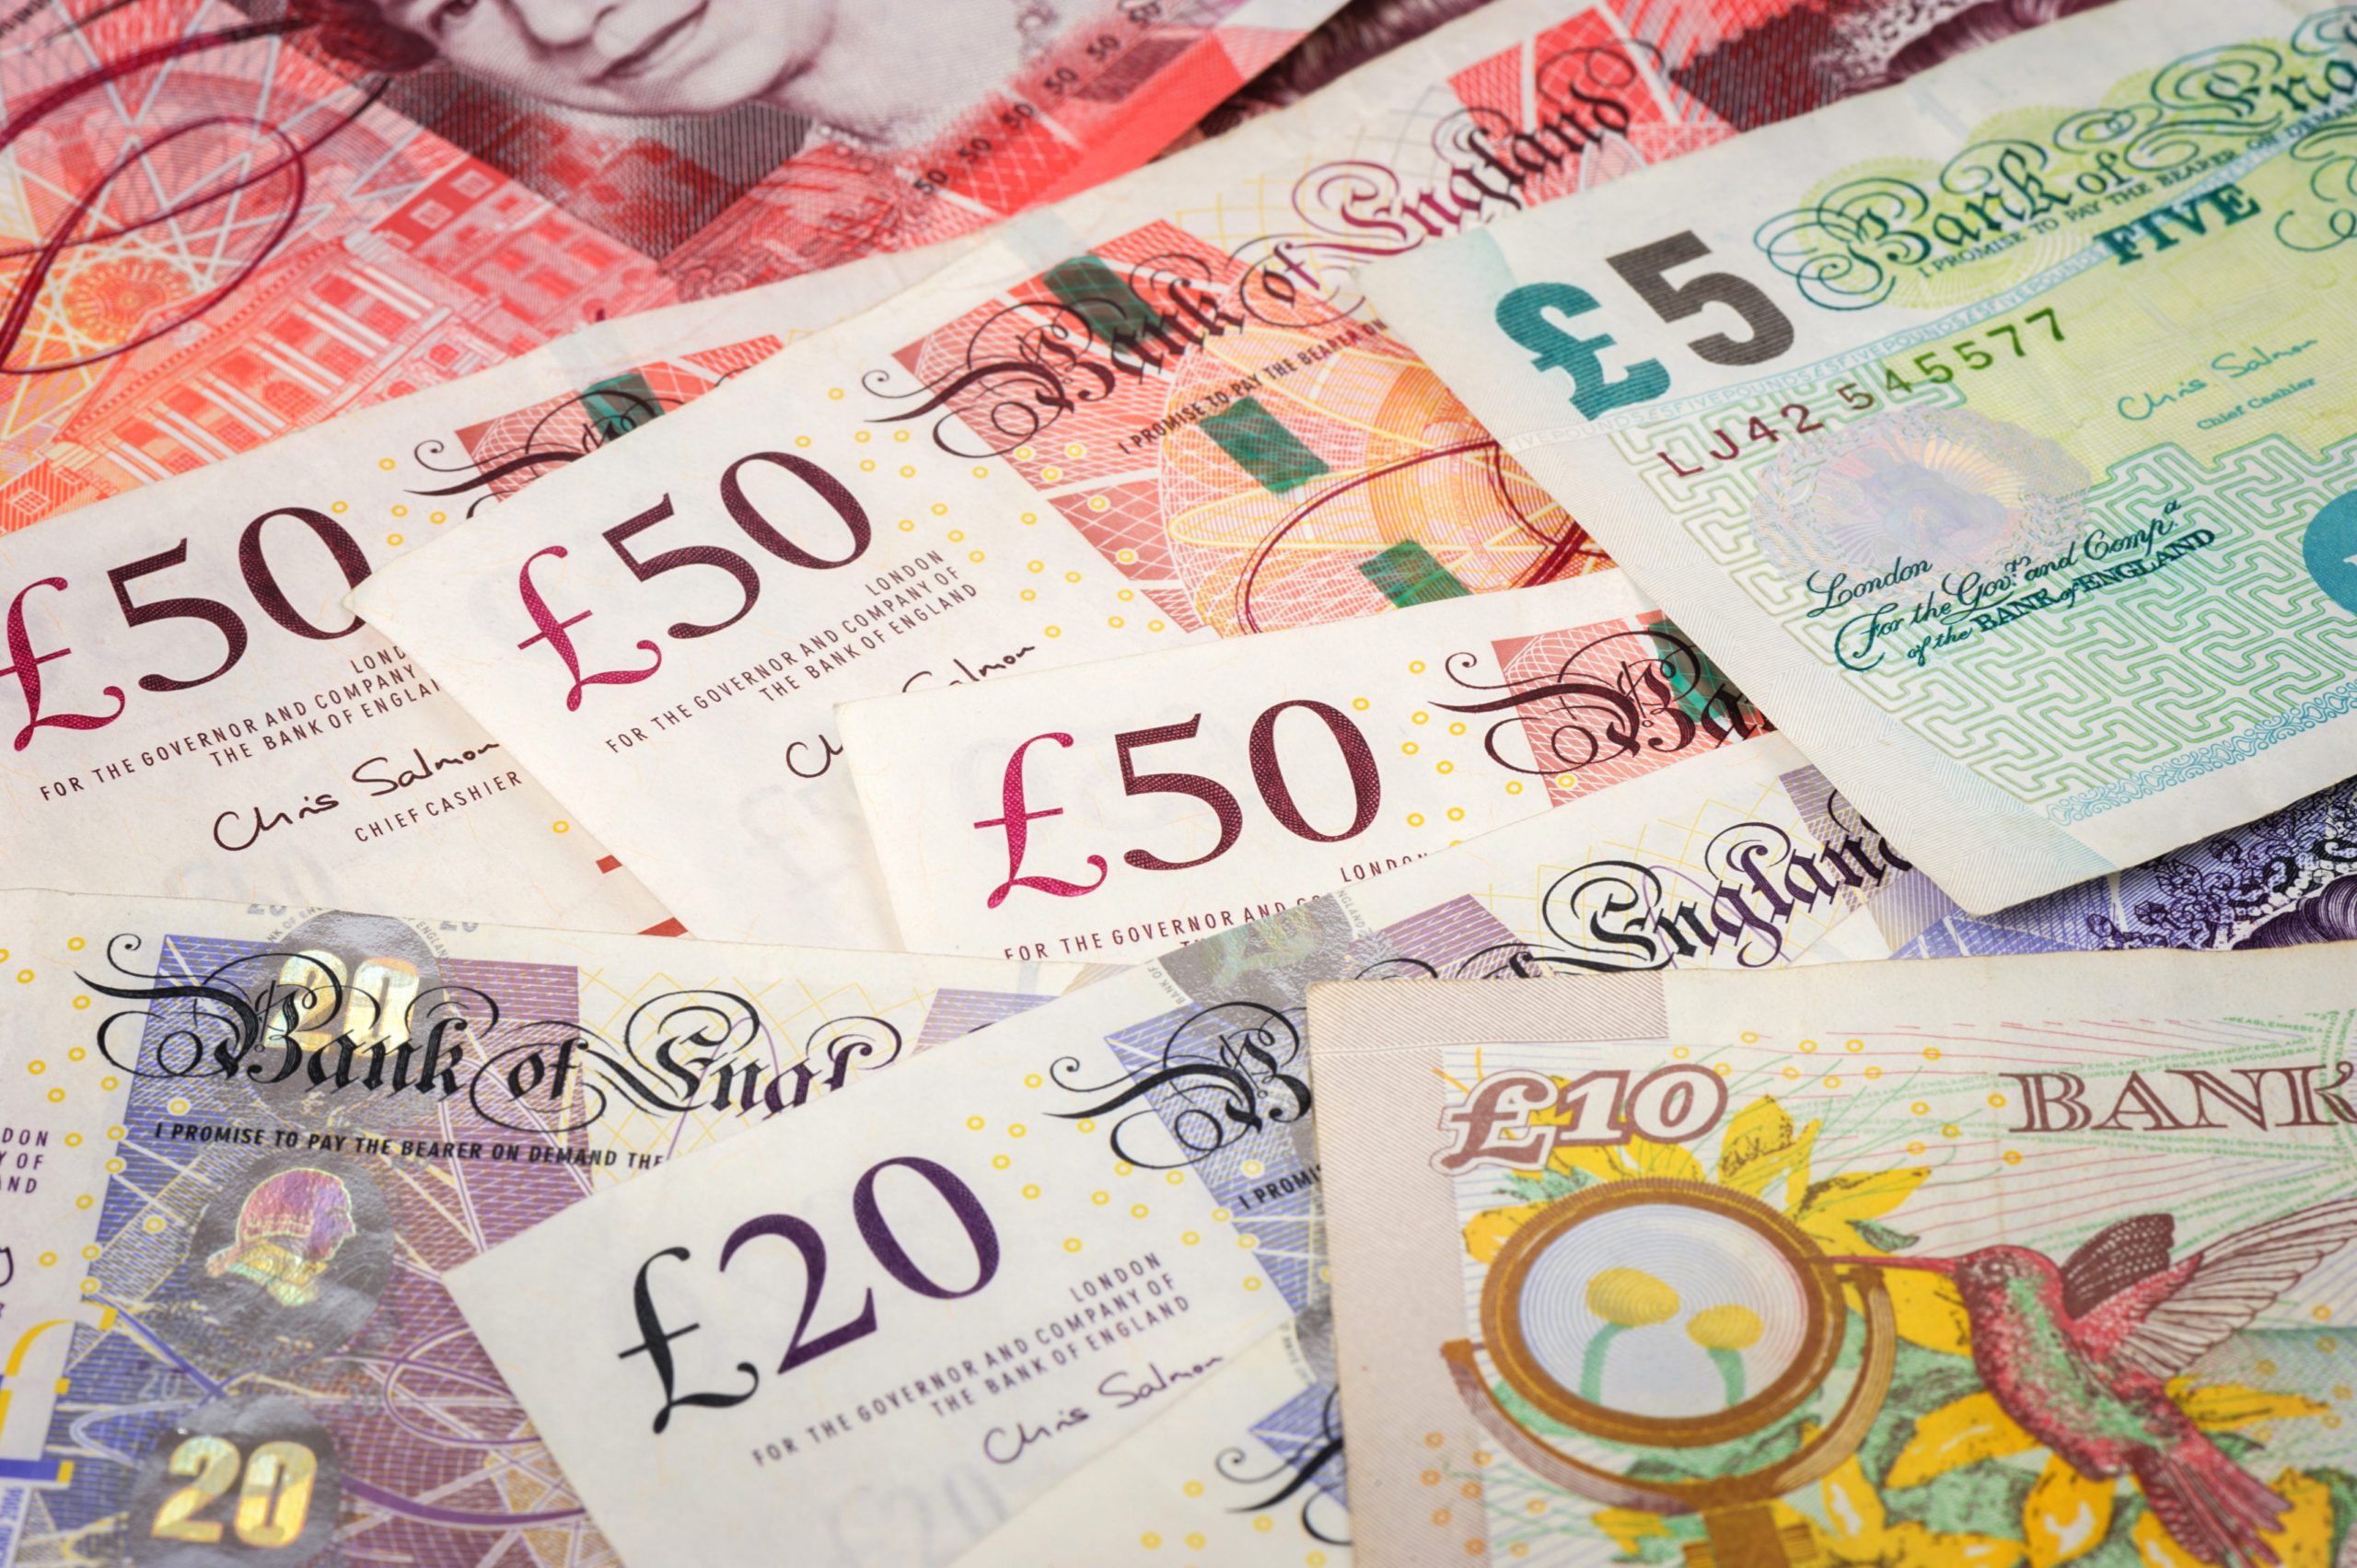 Inflation levels off and the Pound sinks